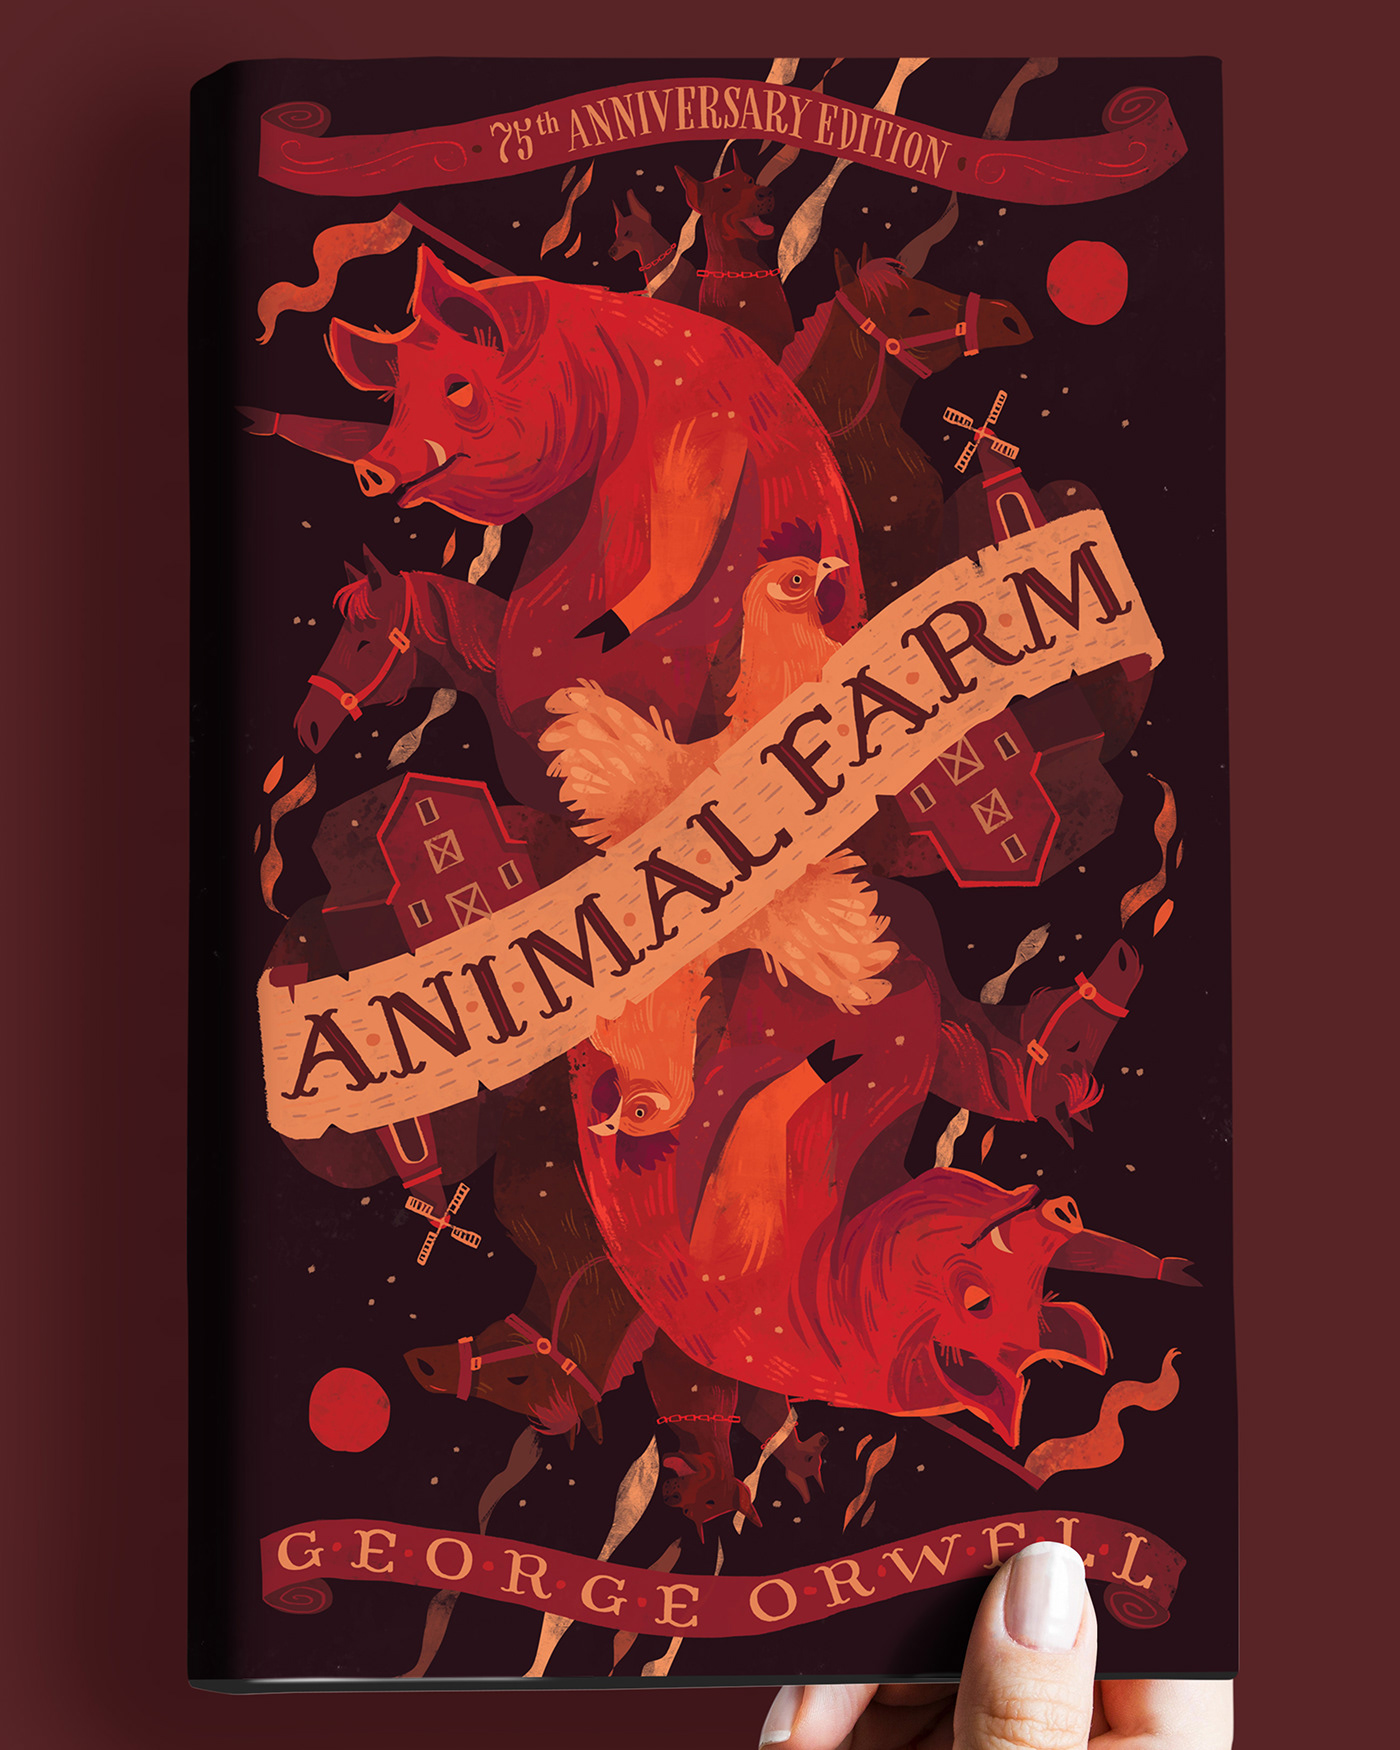 Animal Farm by George Orwell Book Cover Design on Behance